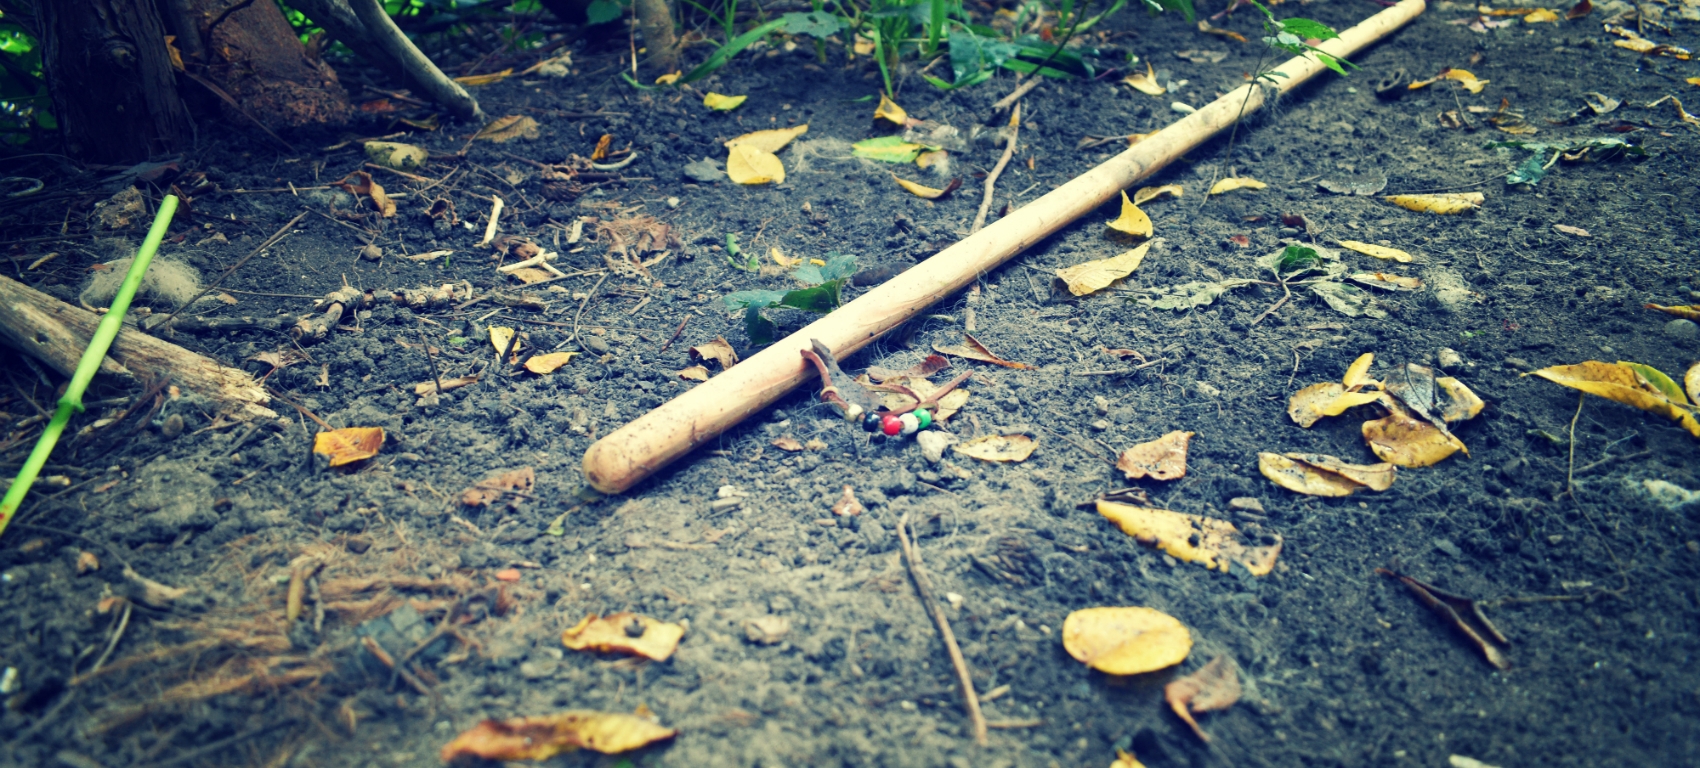 the stick he left behind